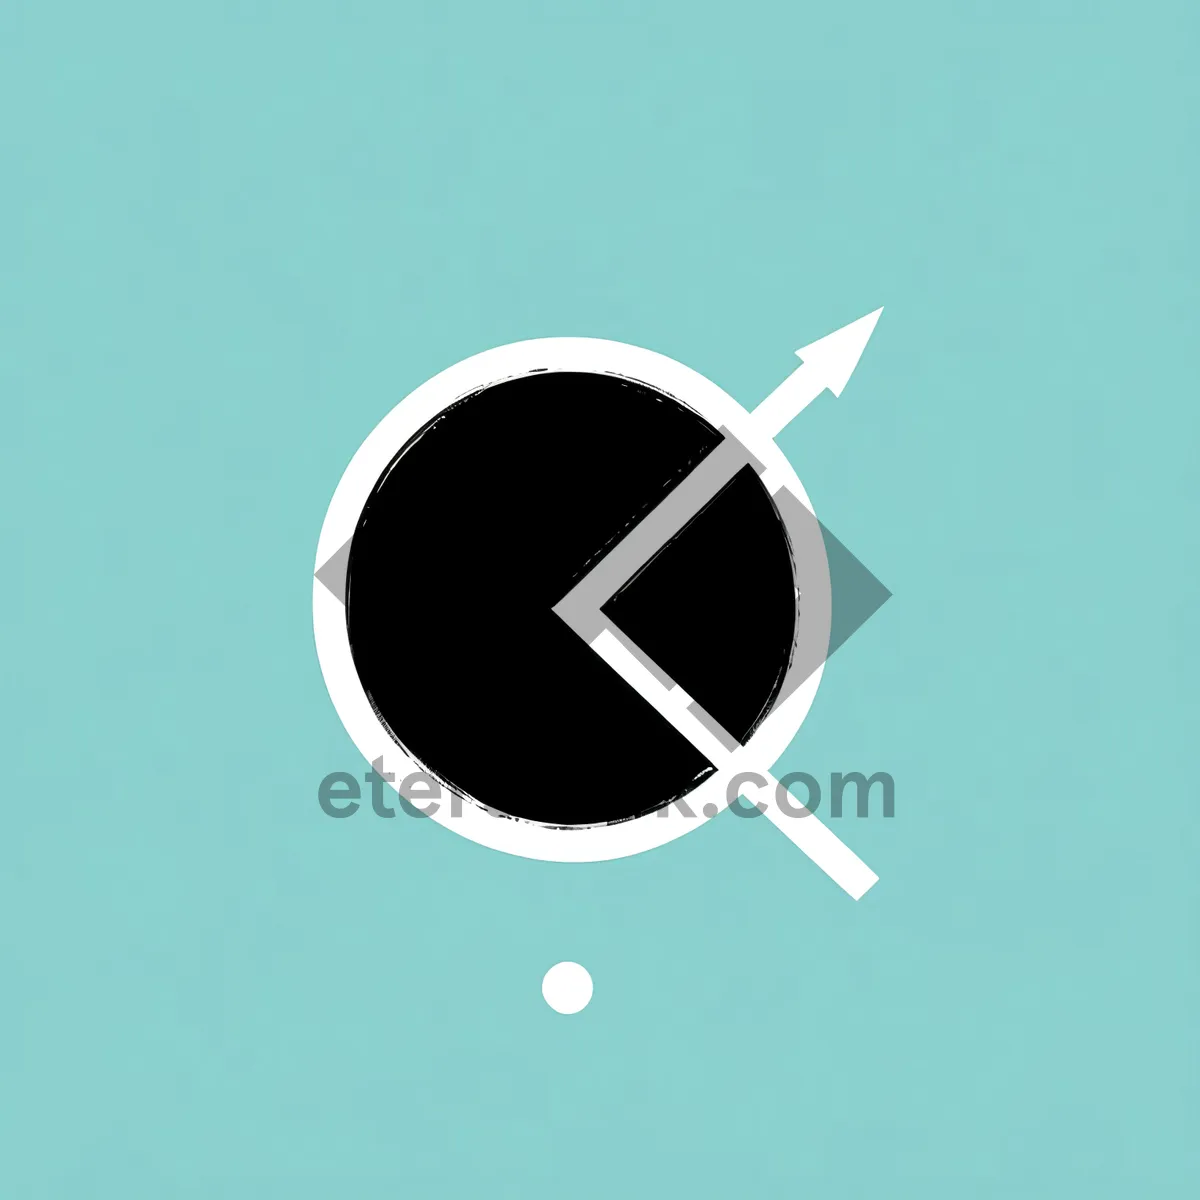 Picture of Analog Round Wall Clock Icon with Shiny Design